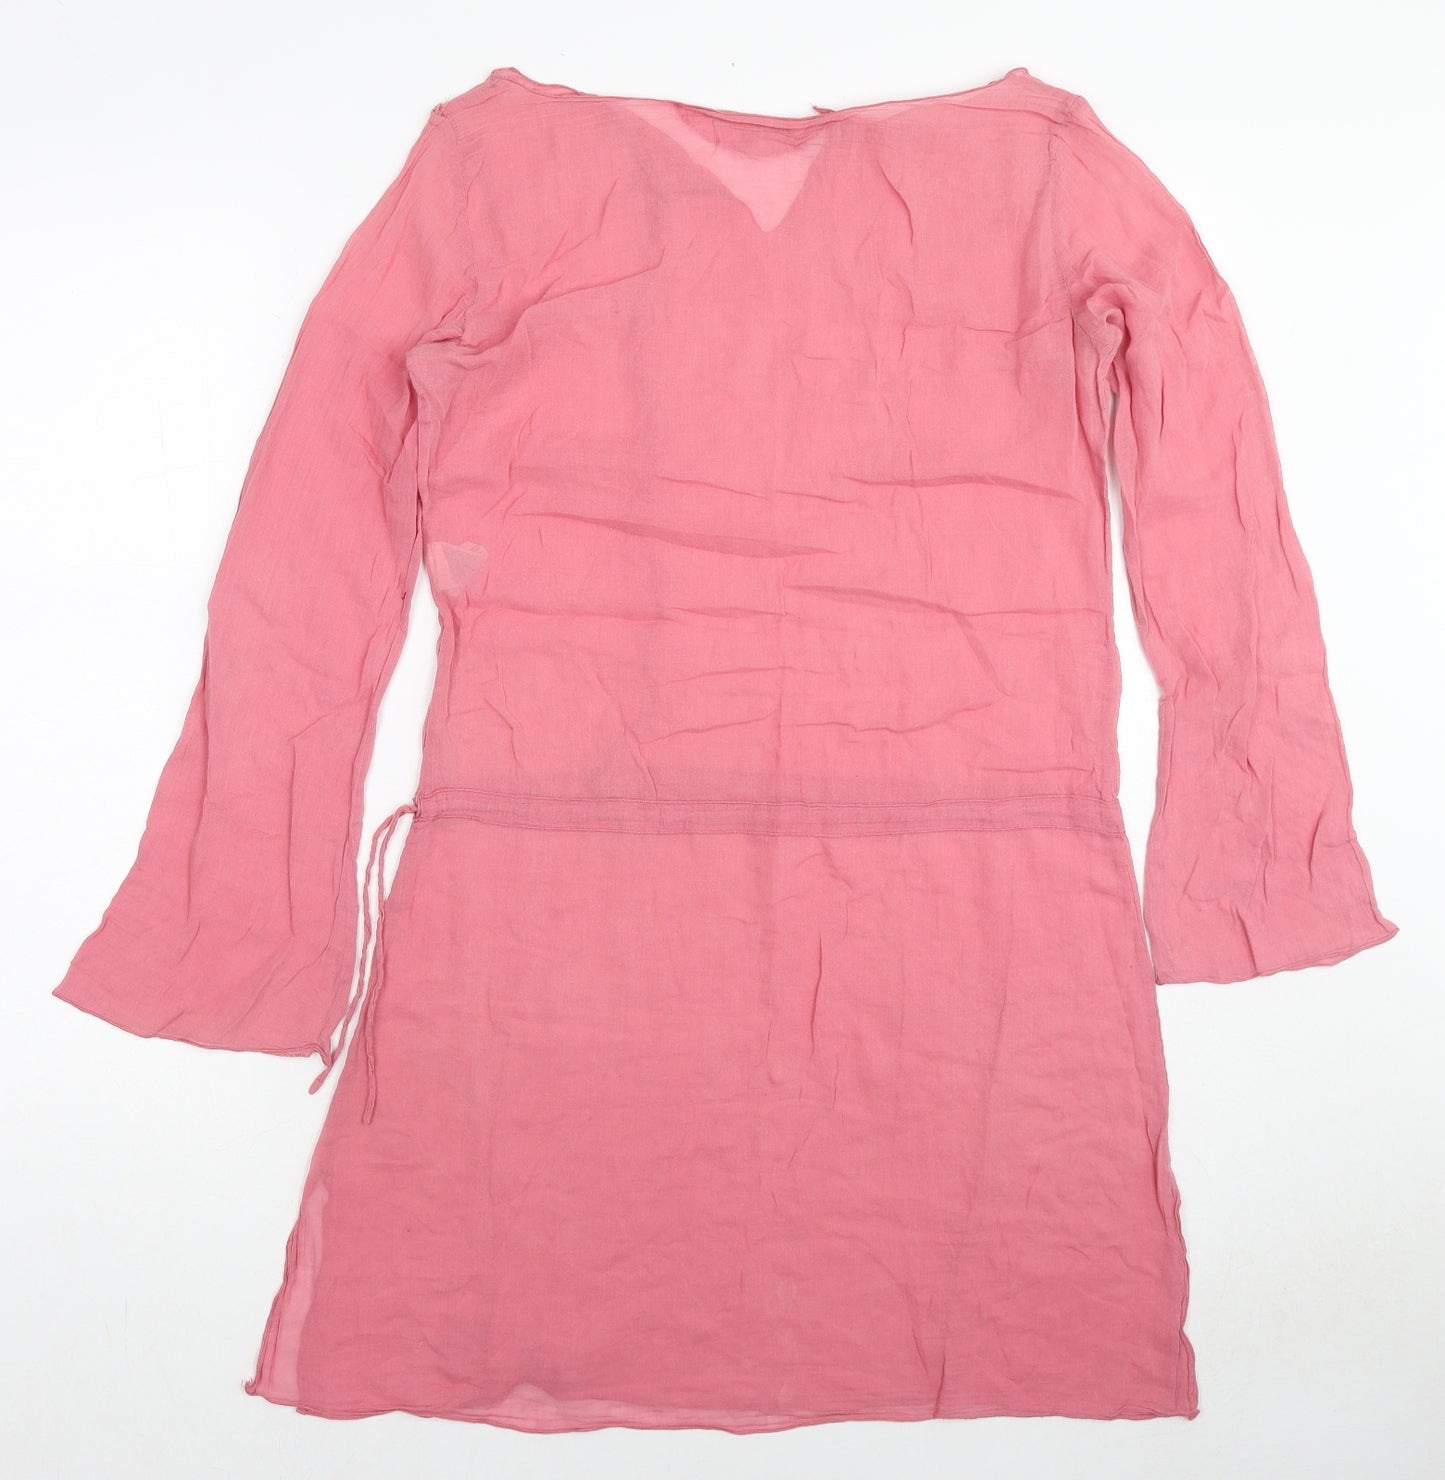 Massimo Dutti Womens Pink Cotton A-Line Size 10 V-Neck Pullover